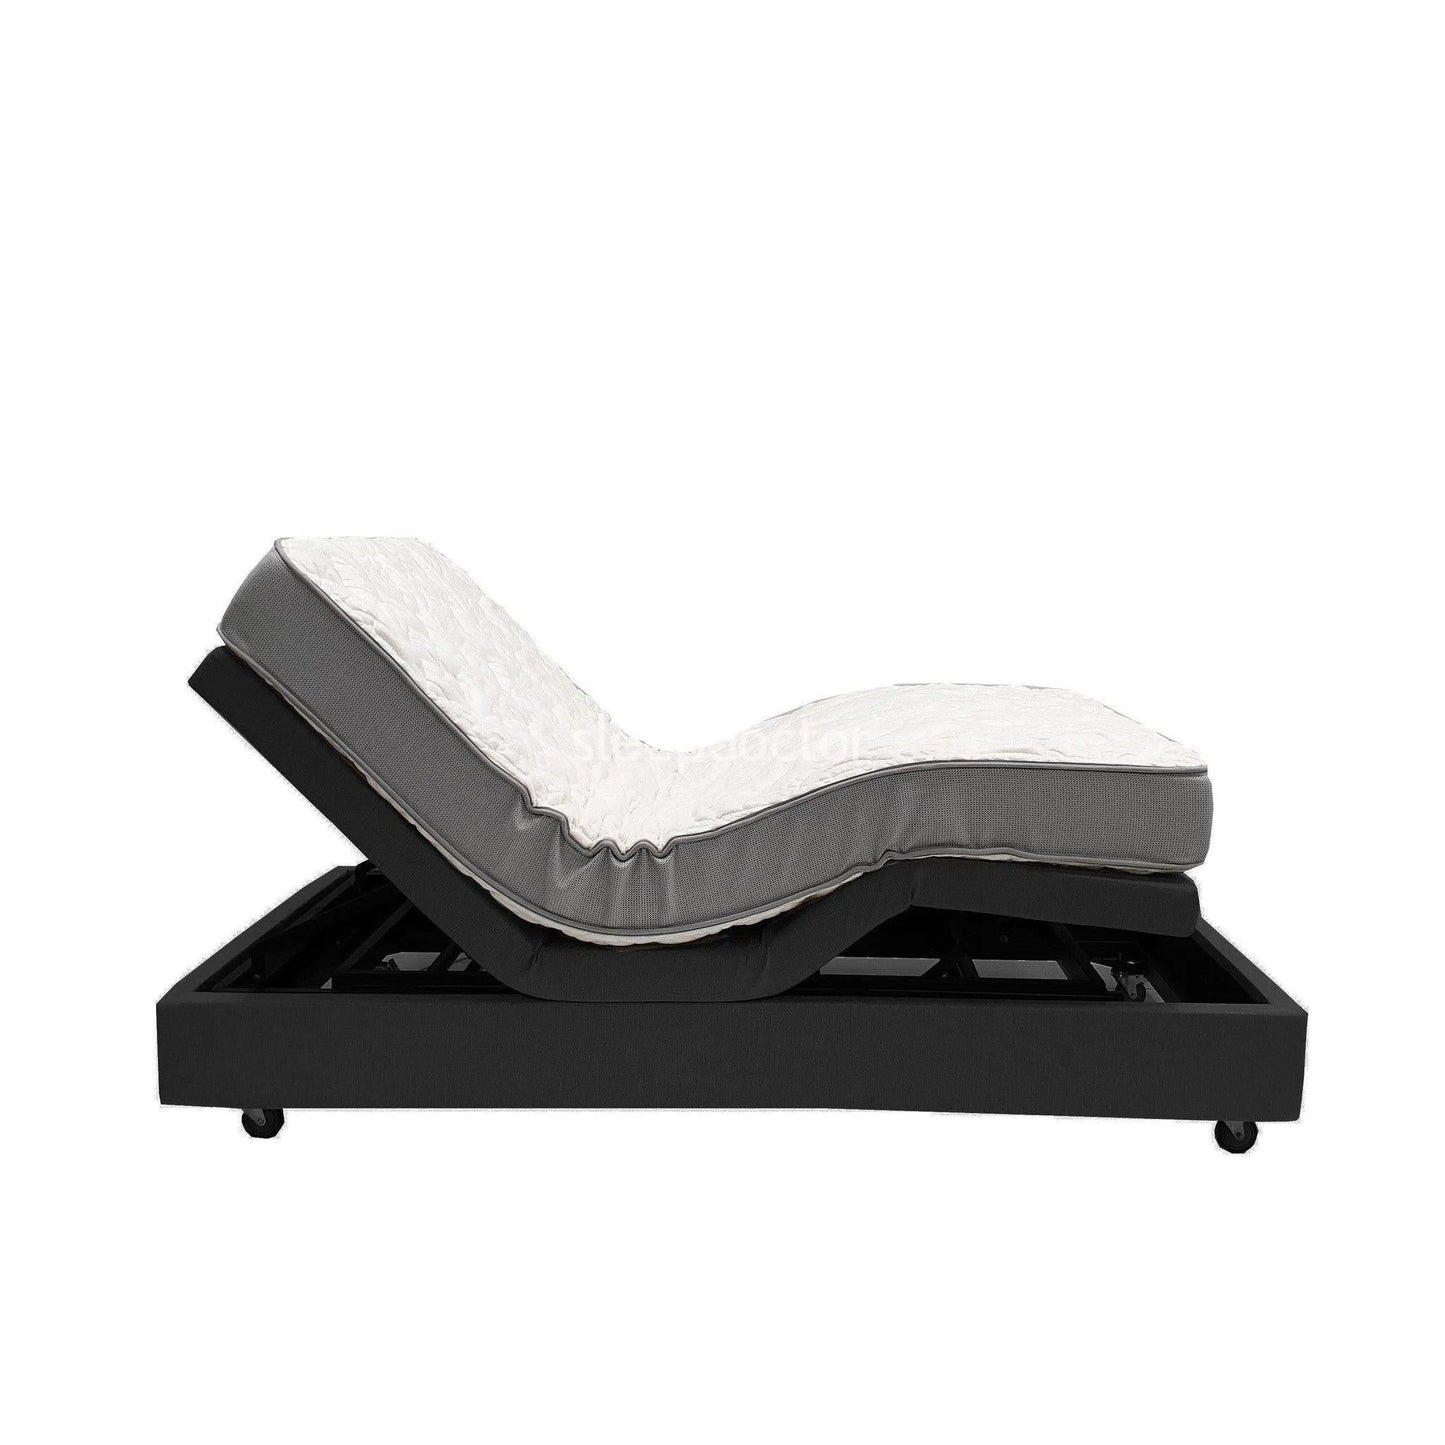 4700-470 Head Foot Adjustable Bed Upholstered with Massage and Standard Mattress-Sleep Doctor